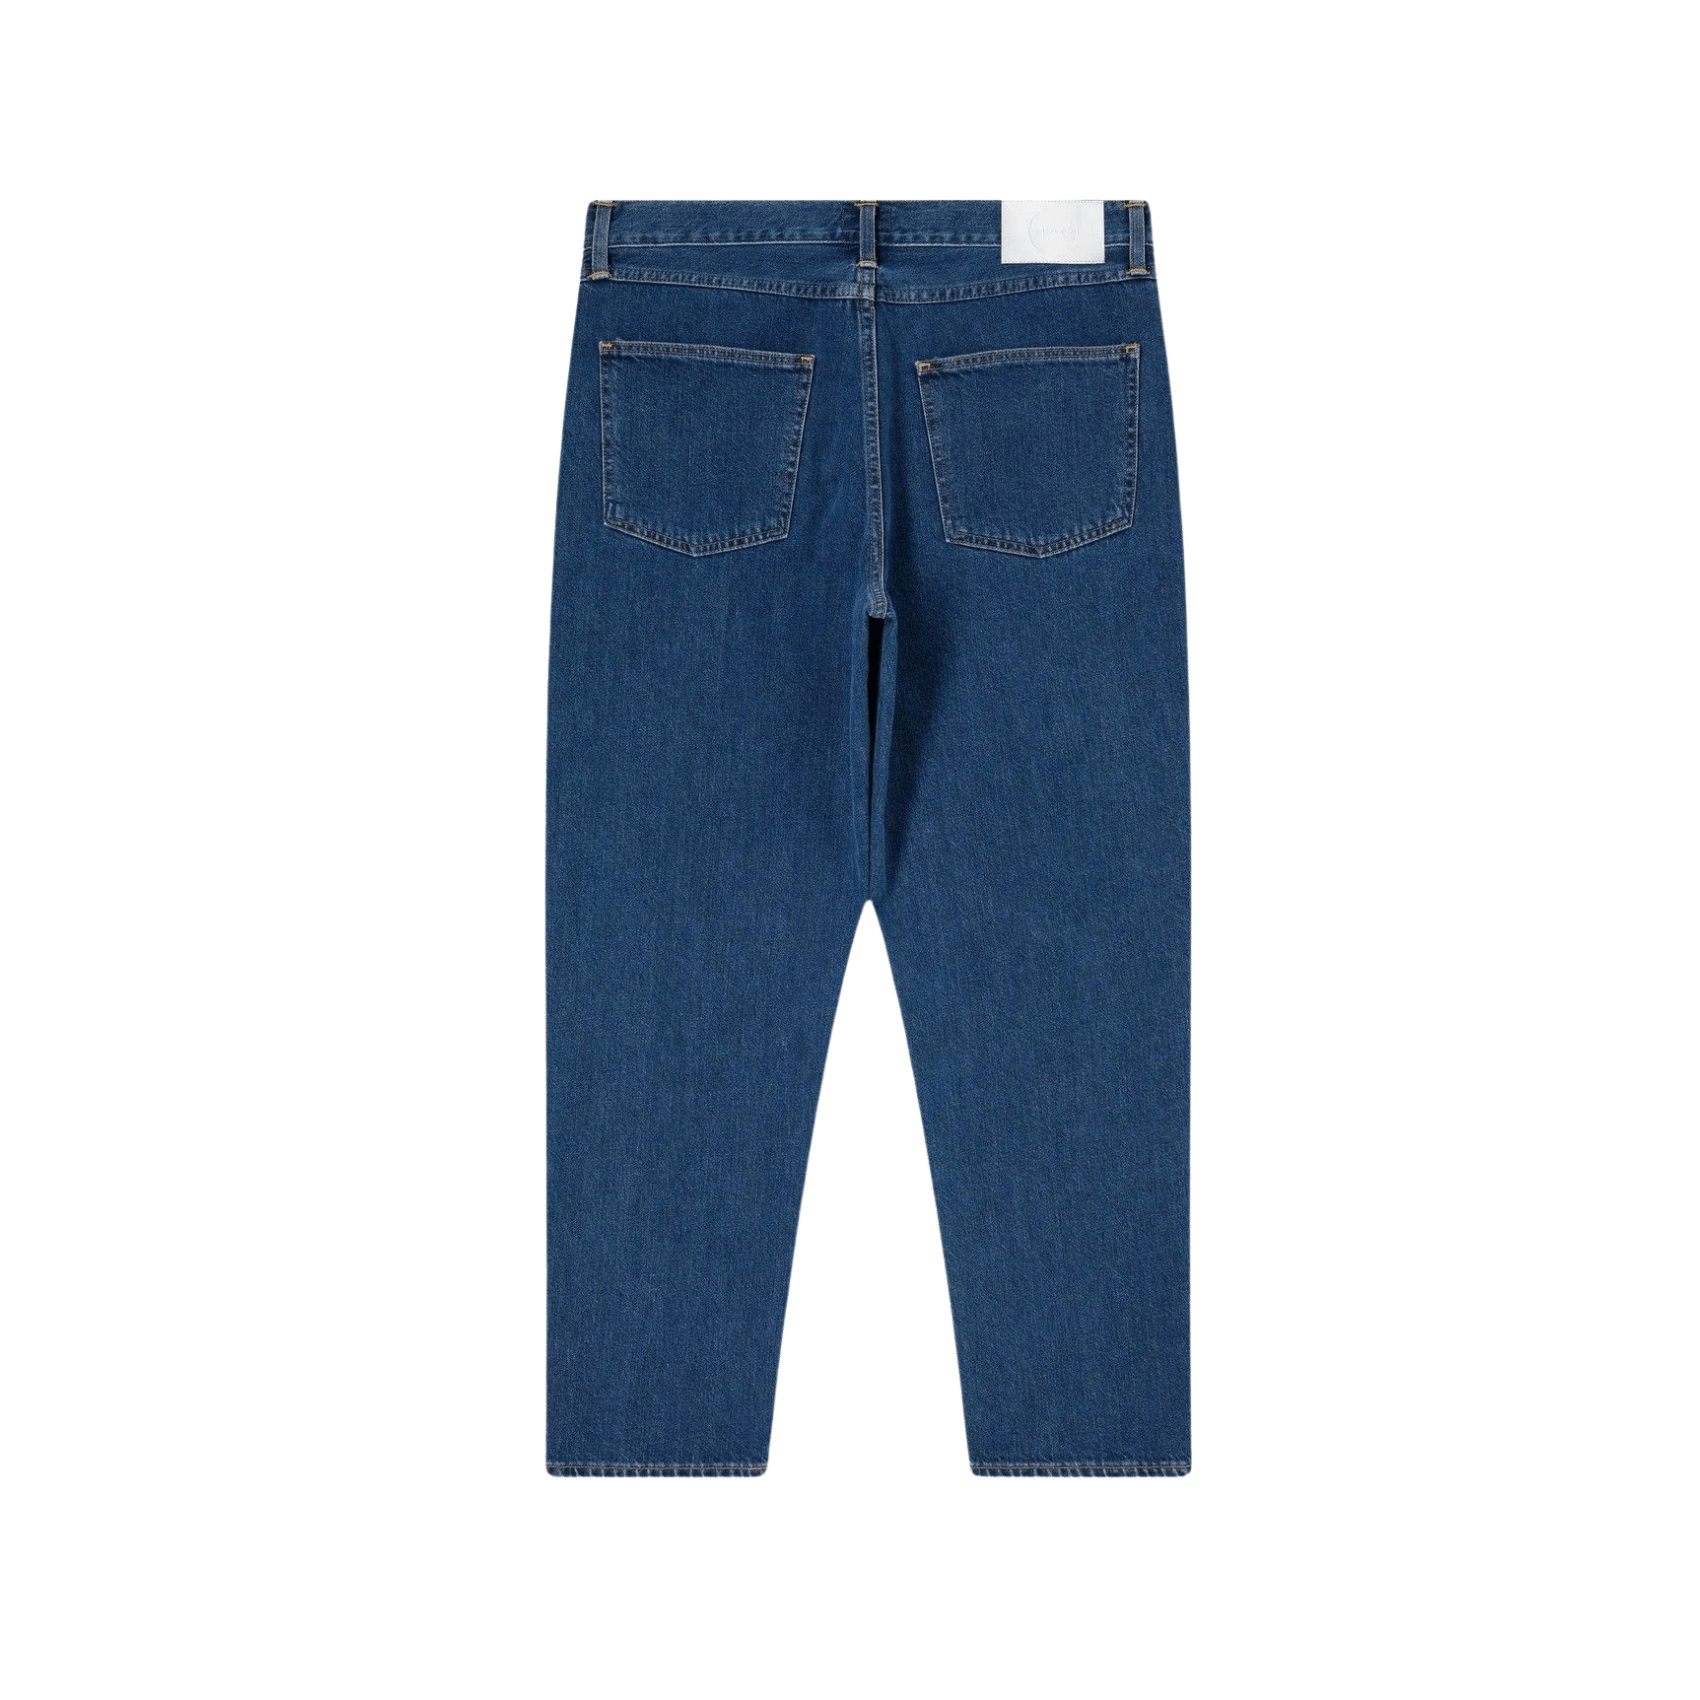 Cosmos Pant - Blue